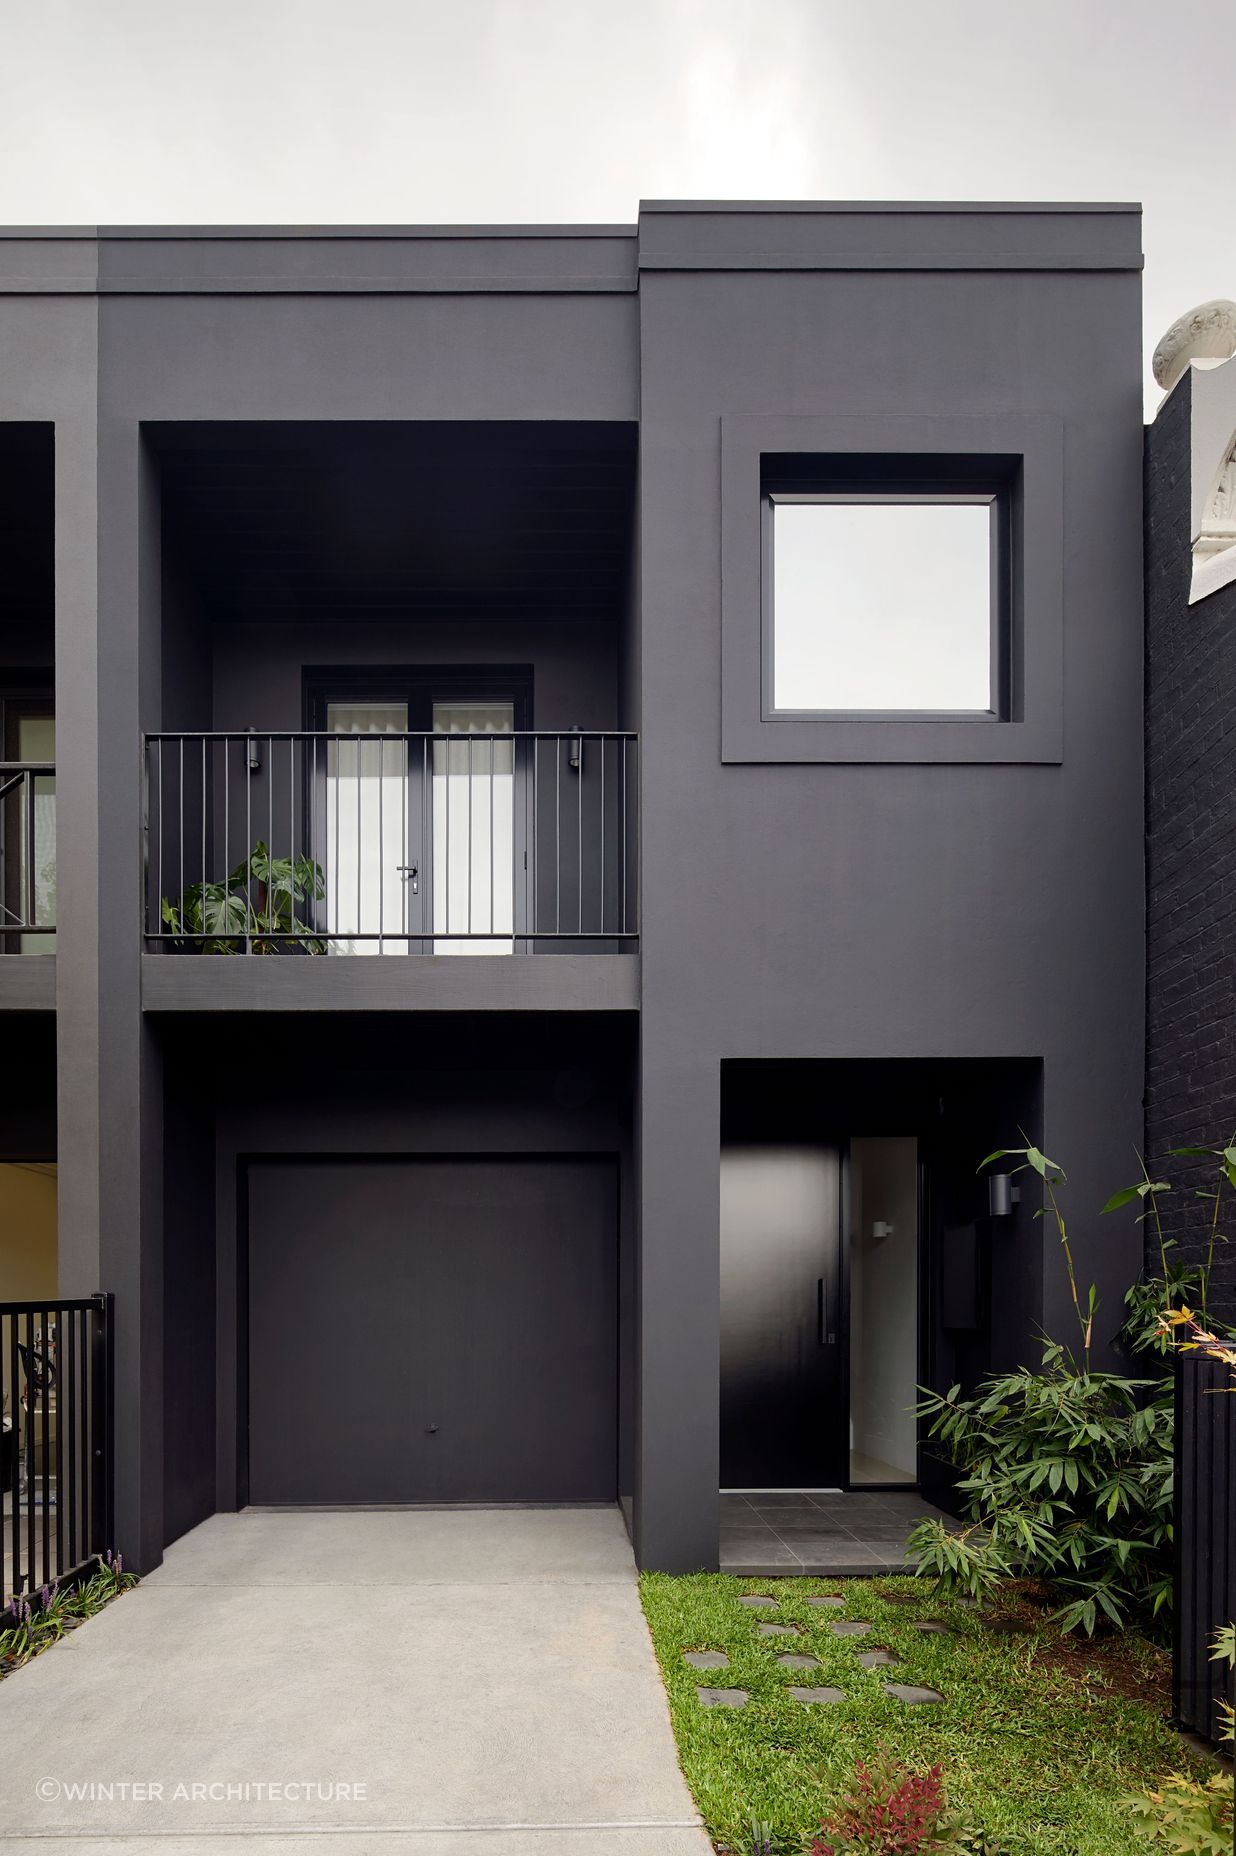 A sumptuous matte black door punctuates the entrance of this South Yarra townhouse, providing a striking contrast to the textured facade. Featured project: South Yarra Townhouse by Winter Architecture